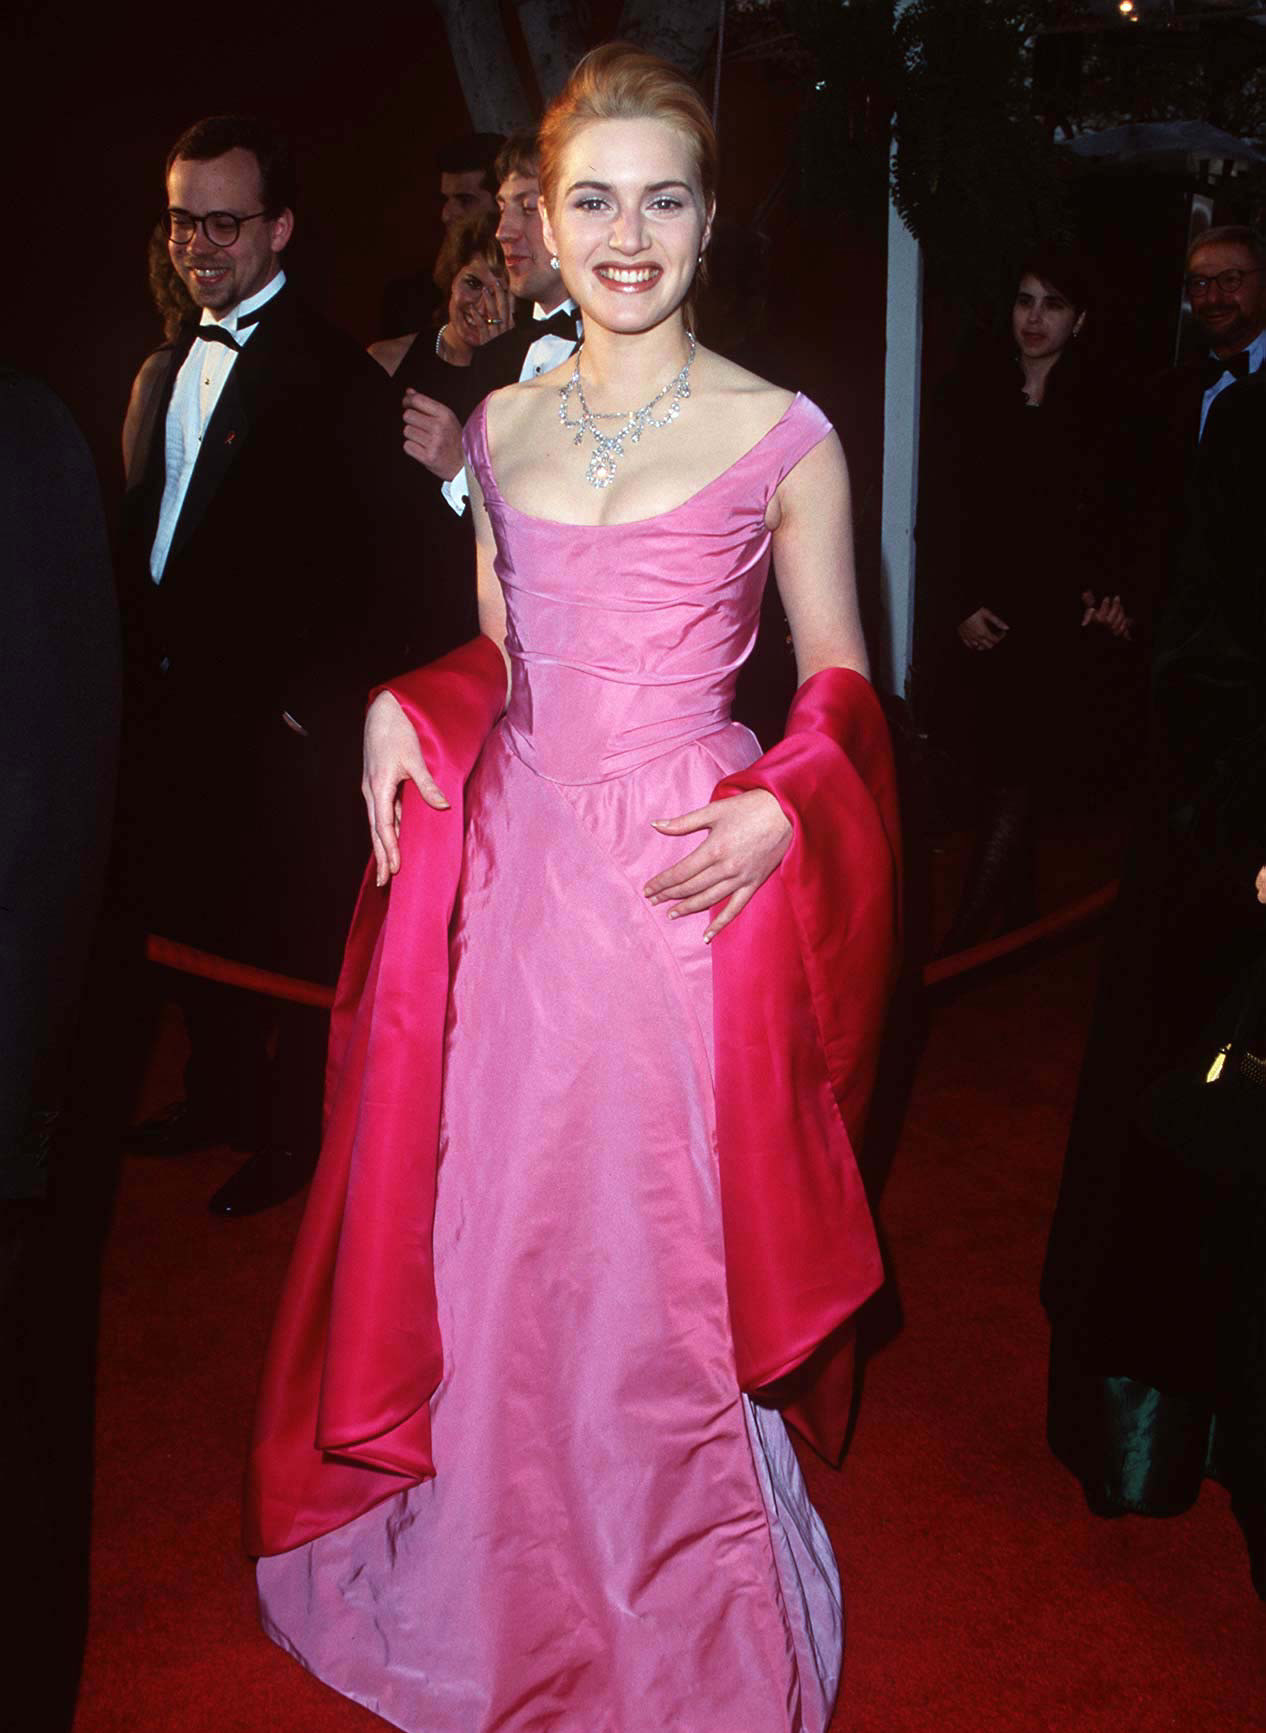 Winslet on the red carpet wearing a pink dress